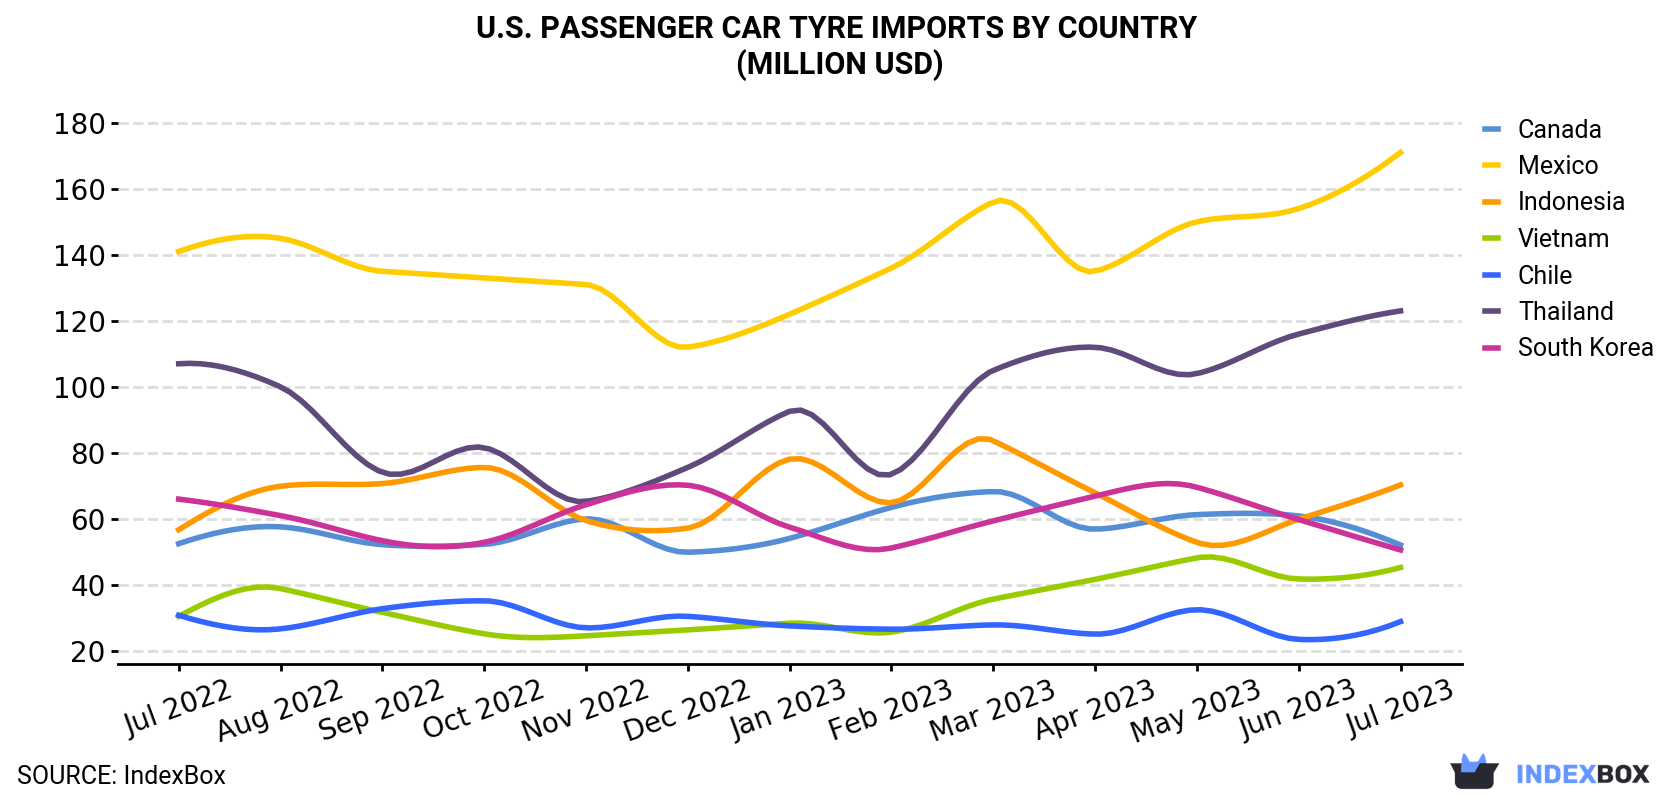 U.S. Passenger Car Tyre Imports By Country (Million USD)